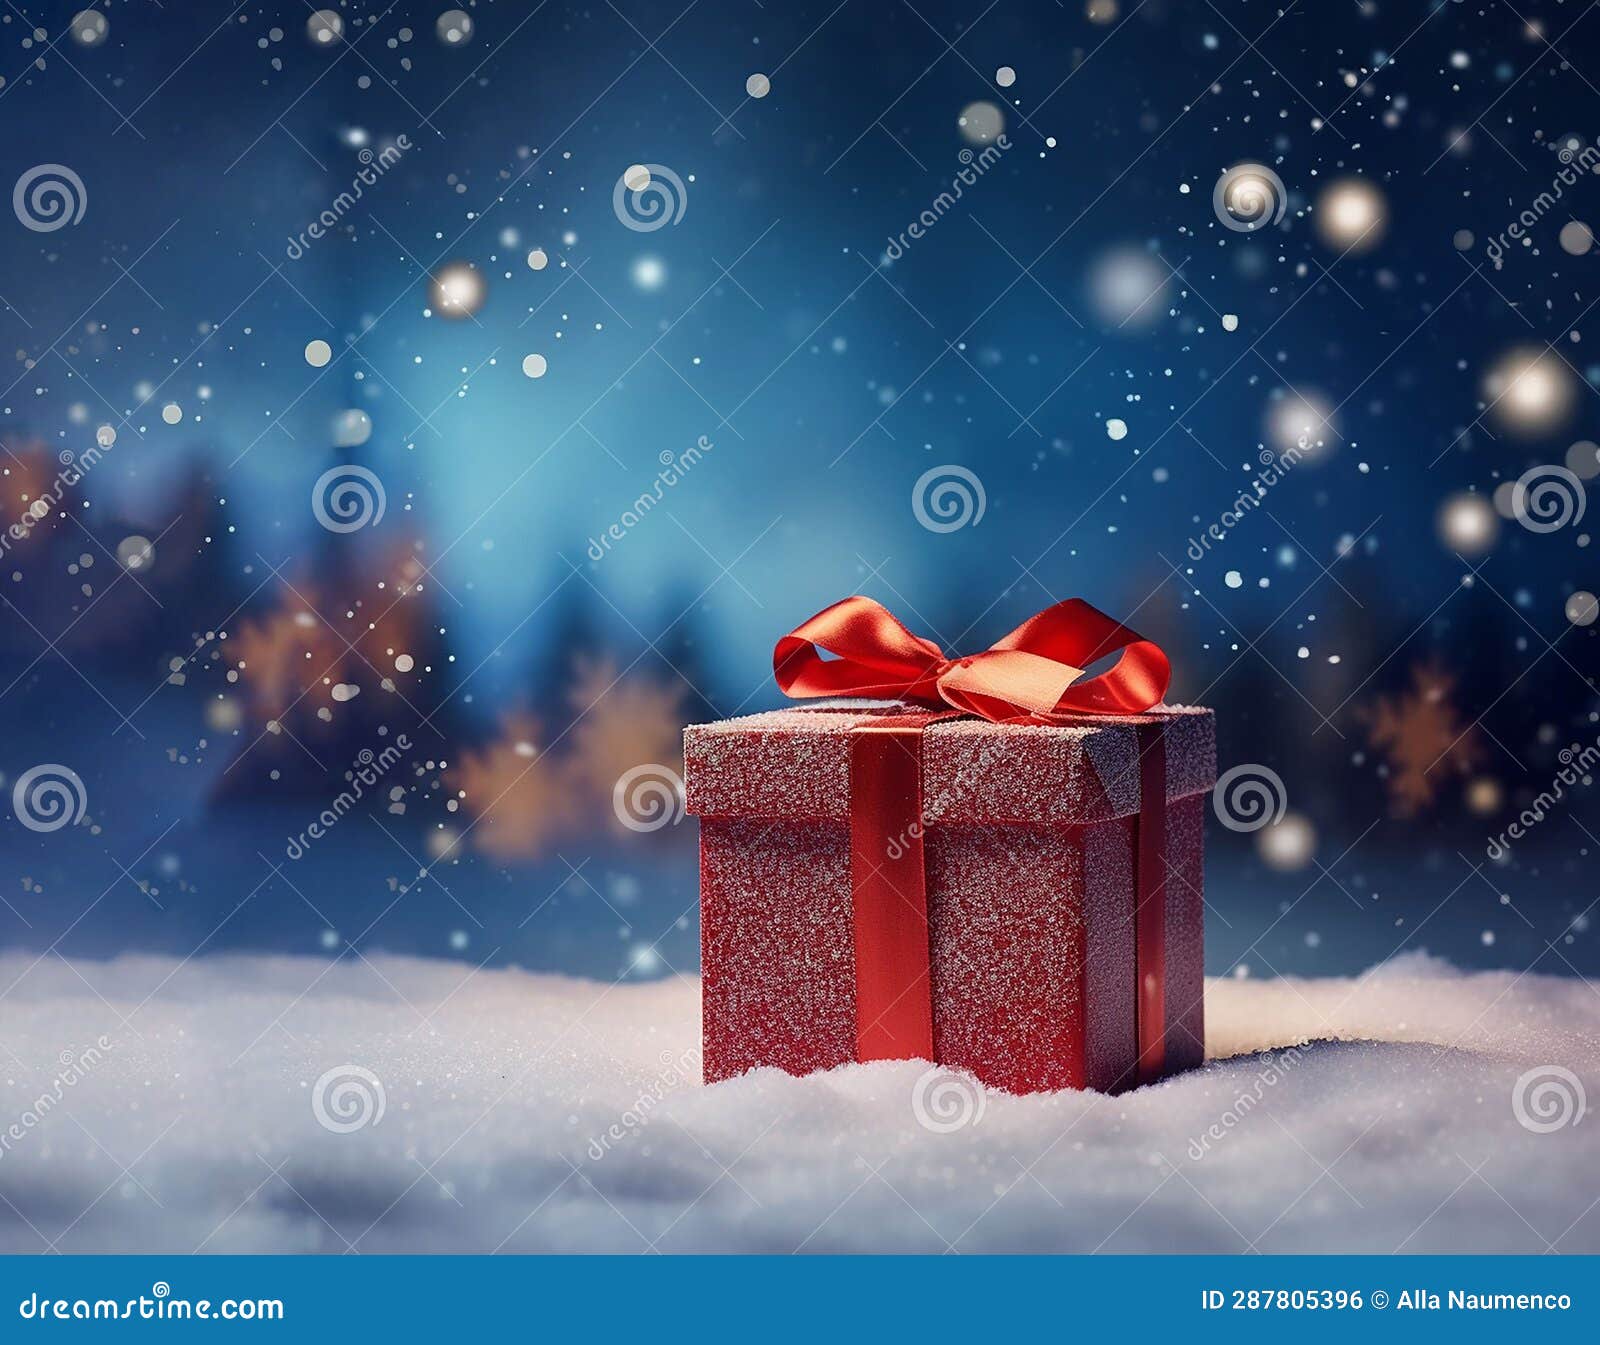 gift red box on blue background. concetto christmas and new year. copy space